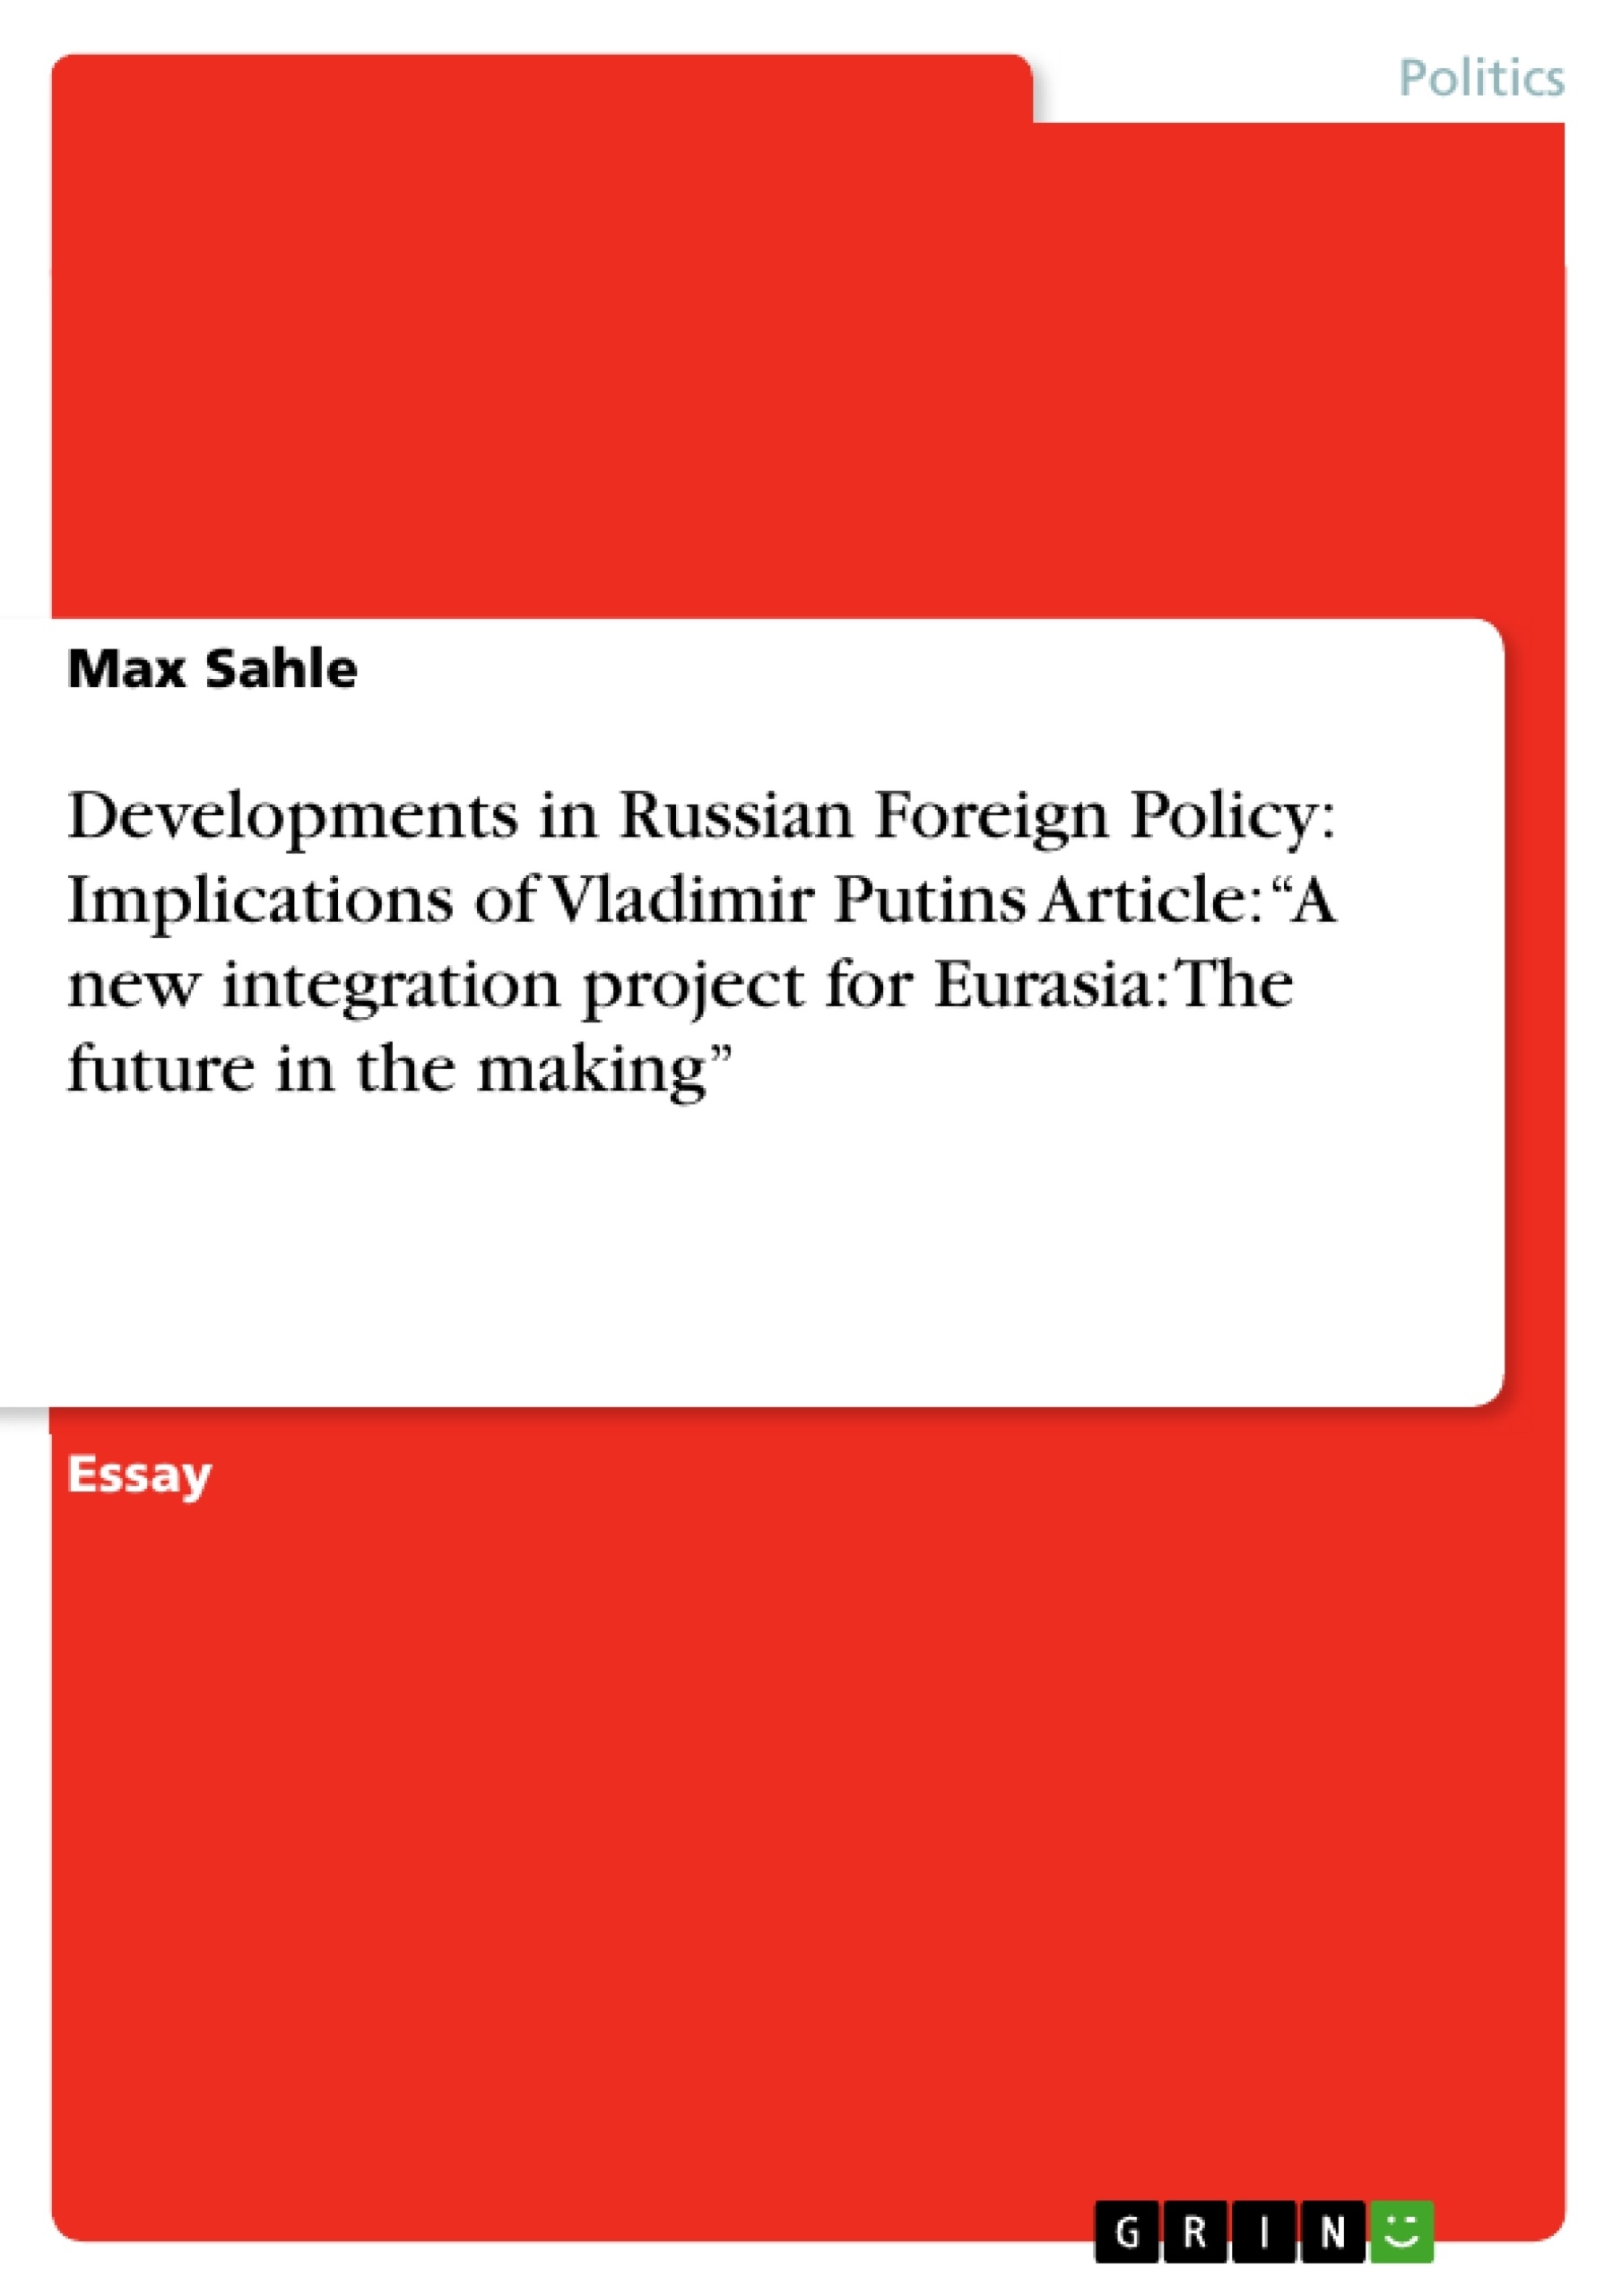 Title: Developments in Russian Foreign Policy: Implications of Vladimir Putins Article: “A new integration project for Eurasia: The future in the making”